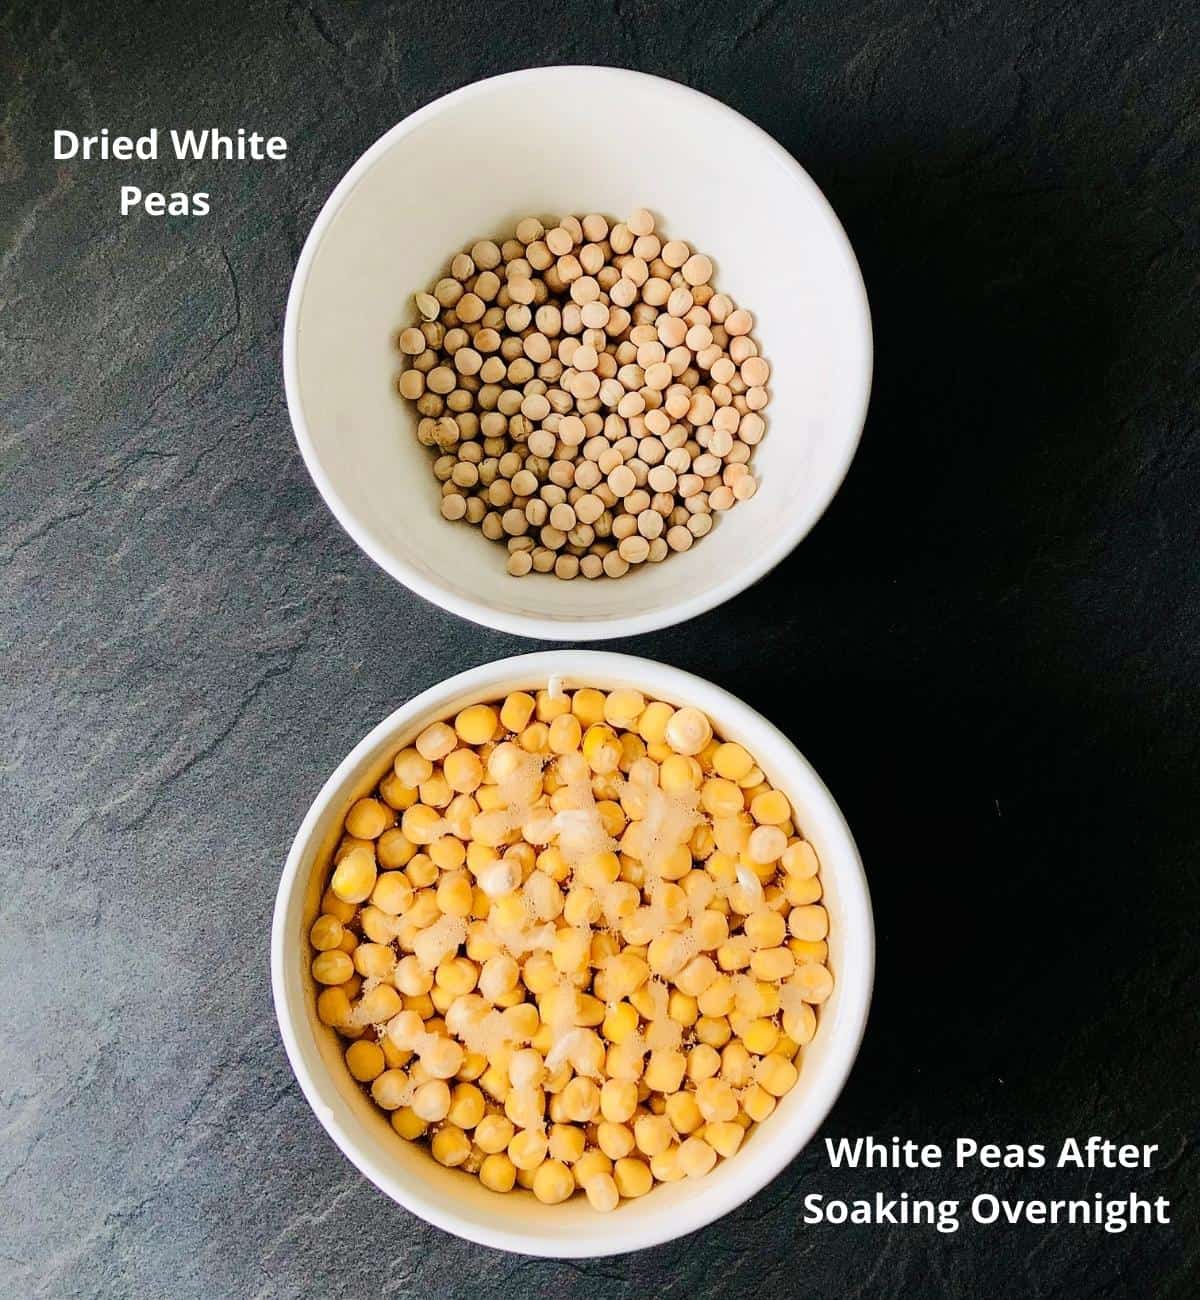 Two bowl containing white peas. One bowl contains dry white peas, the other bowl contains white peas soaked overnight